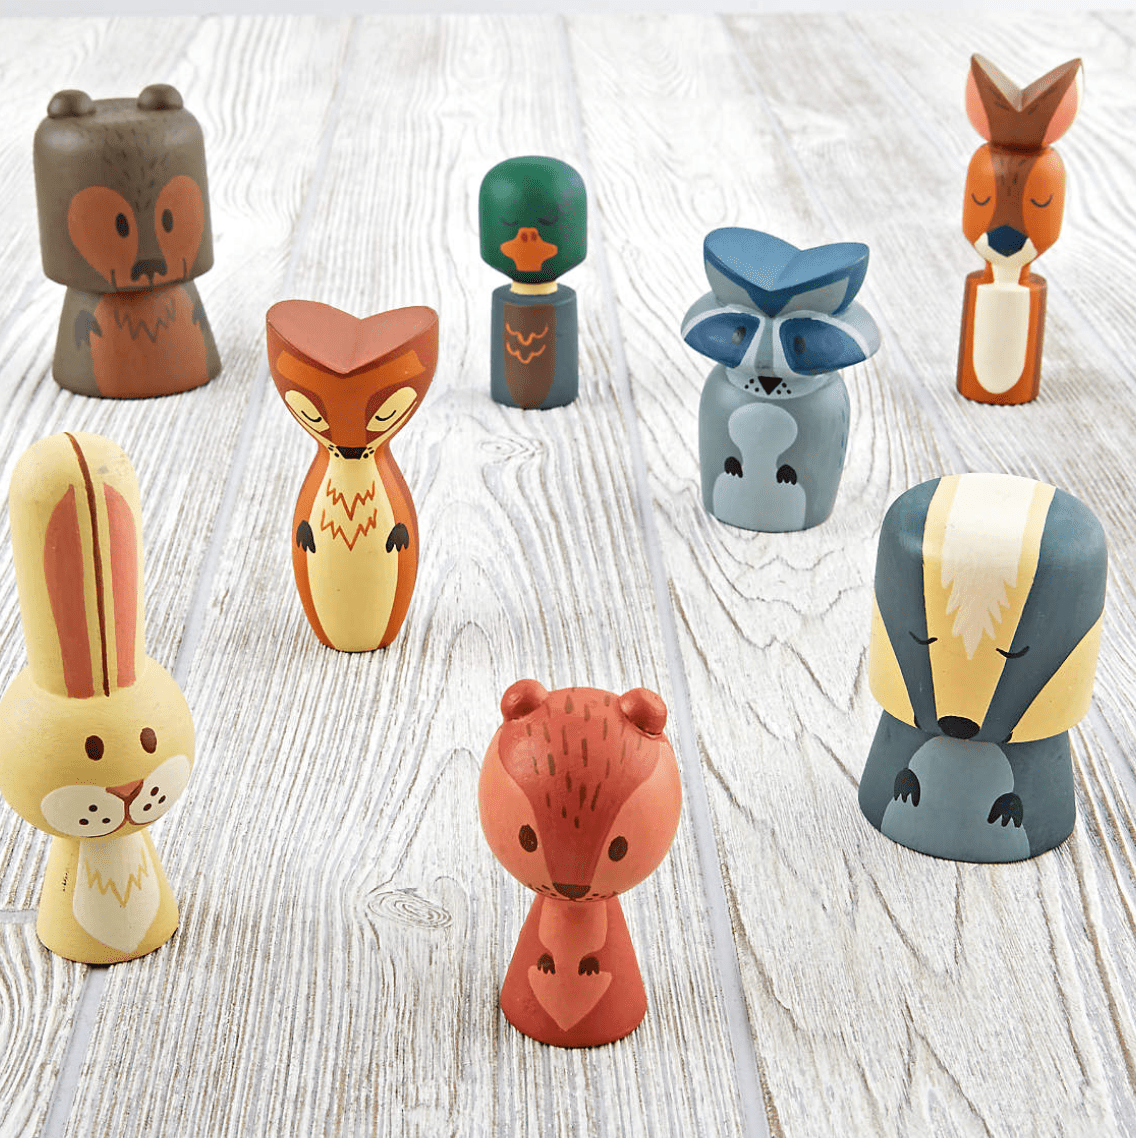 <p>These adorable wooden toys make a perfect Easter basket gift&mdash;and are ready for creative adventures (or a treasured spot on a bookshelf) after the big day. </p>
                            